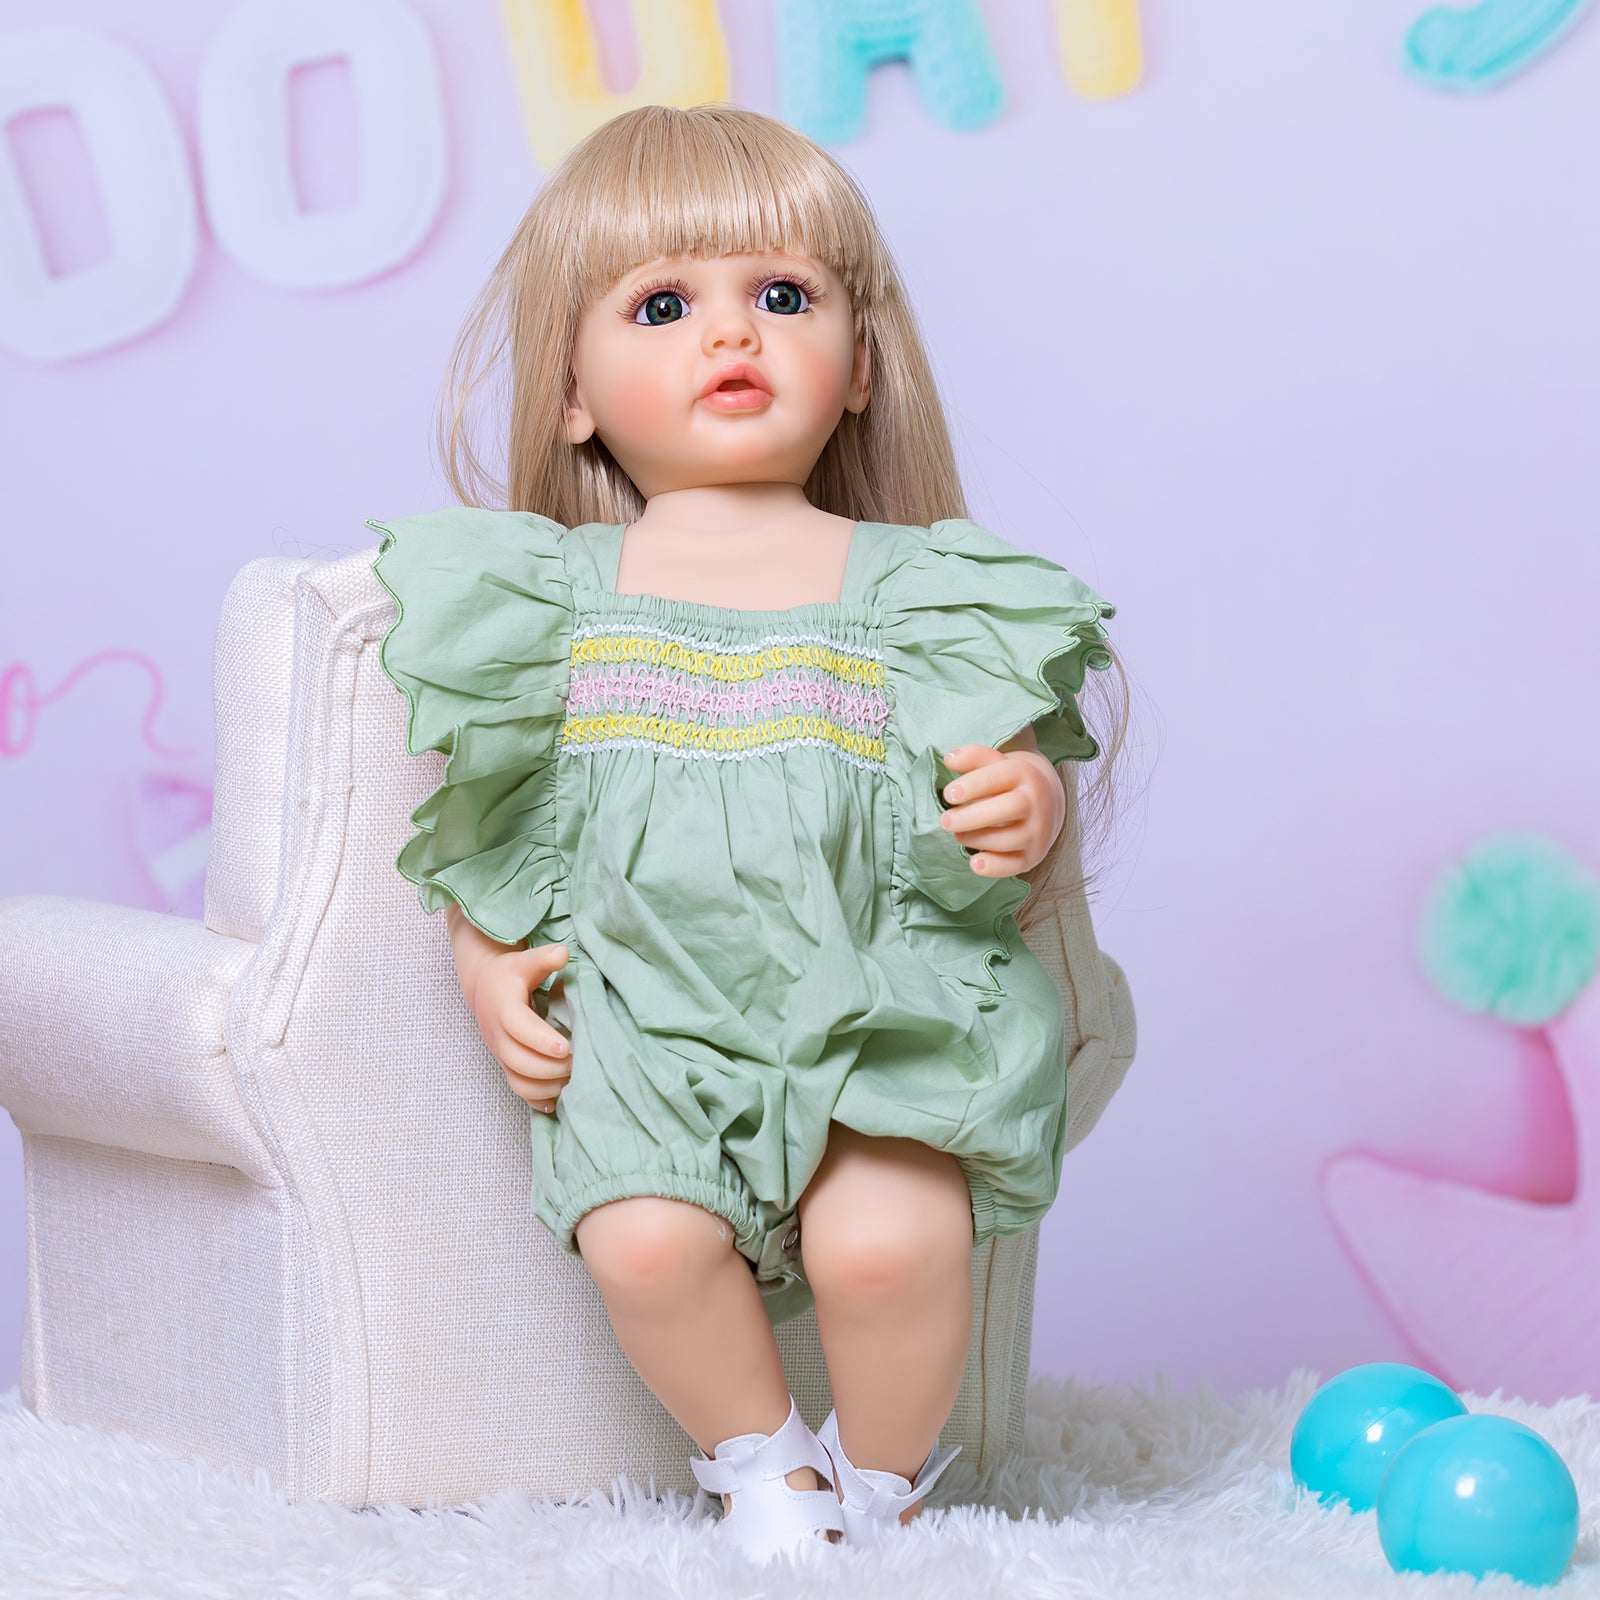 Beautiful Blonde Long Hair Princess Girls Realistic Reborn Baby Dolls Silicone Full Body Lifelike Toddler Dolls That Look Real 22 Inch 55CM Real Newborn Babies Size Reborn Dolls Toys Gifts For Ages 3+